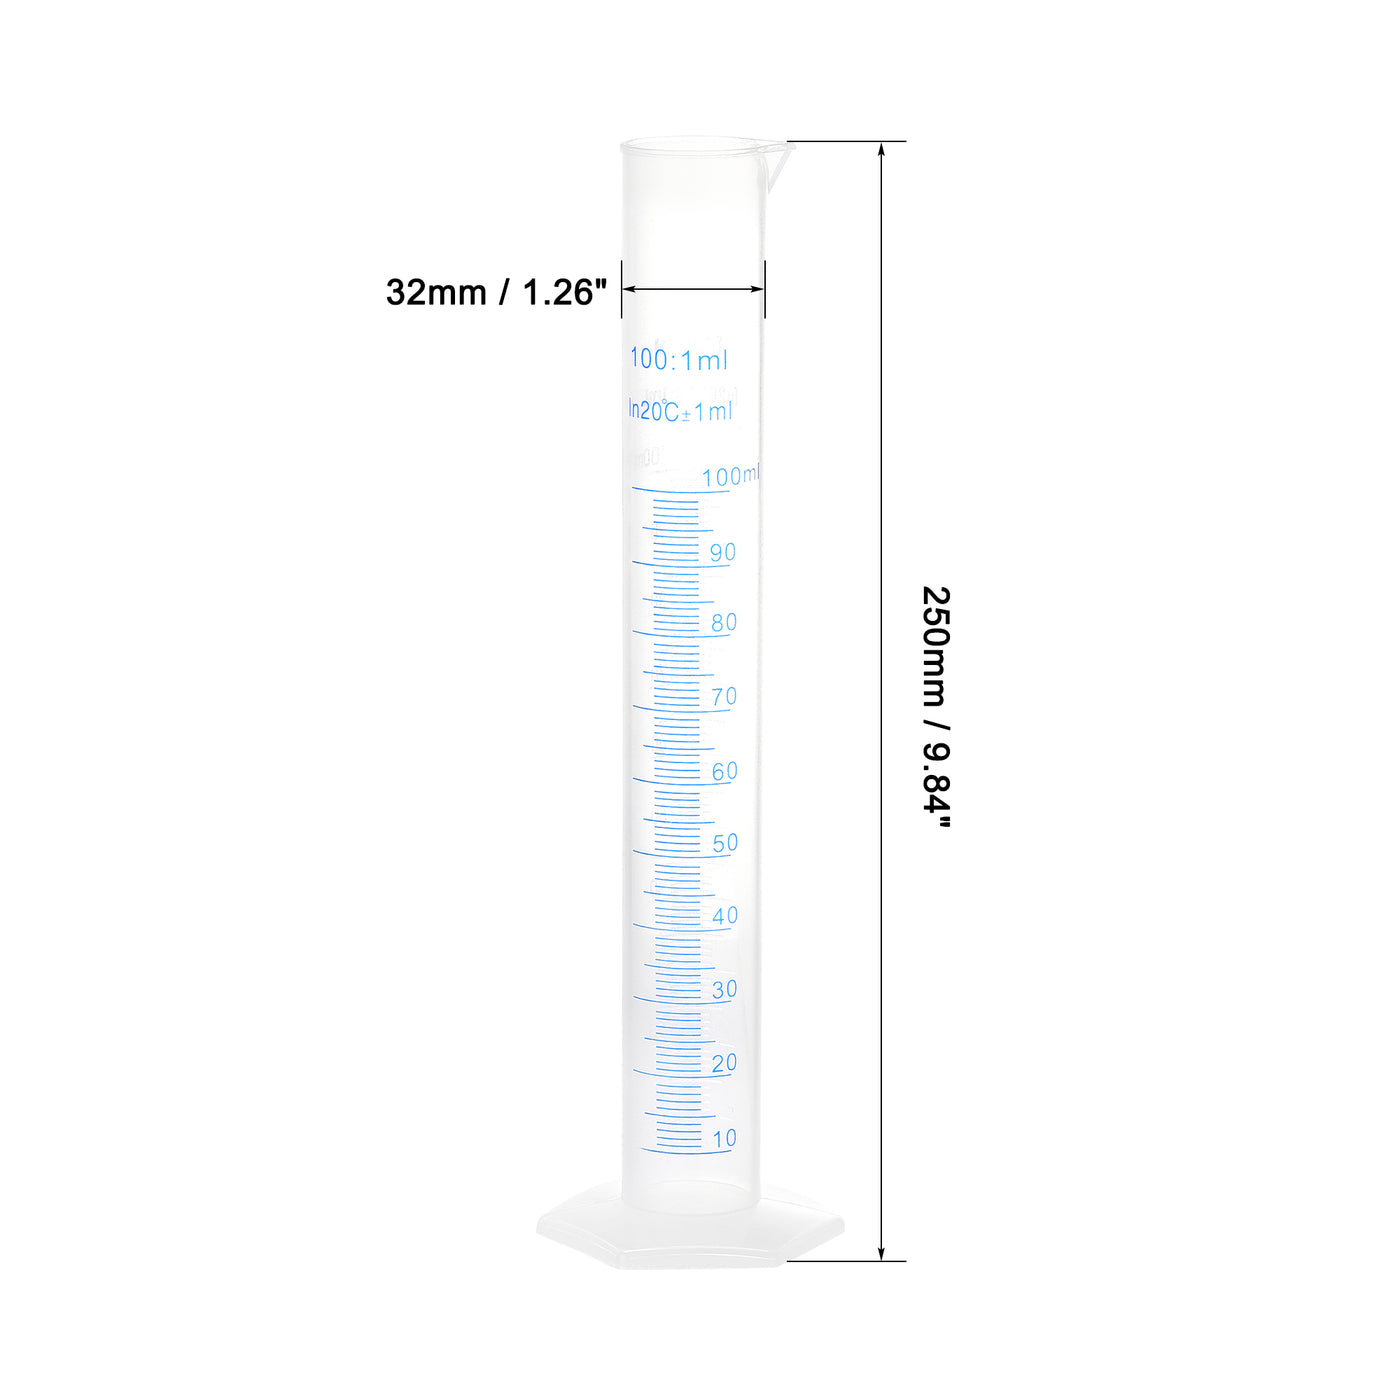 uxcell Uxcell Plastic Graduated Cylinder, 100ml Measuring Cylinder, 2-Sided Metric Marking